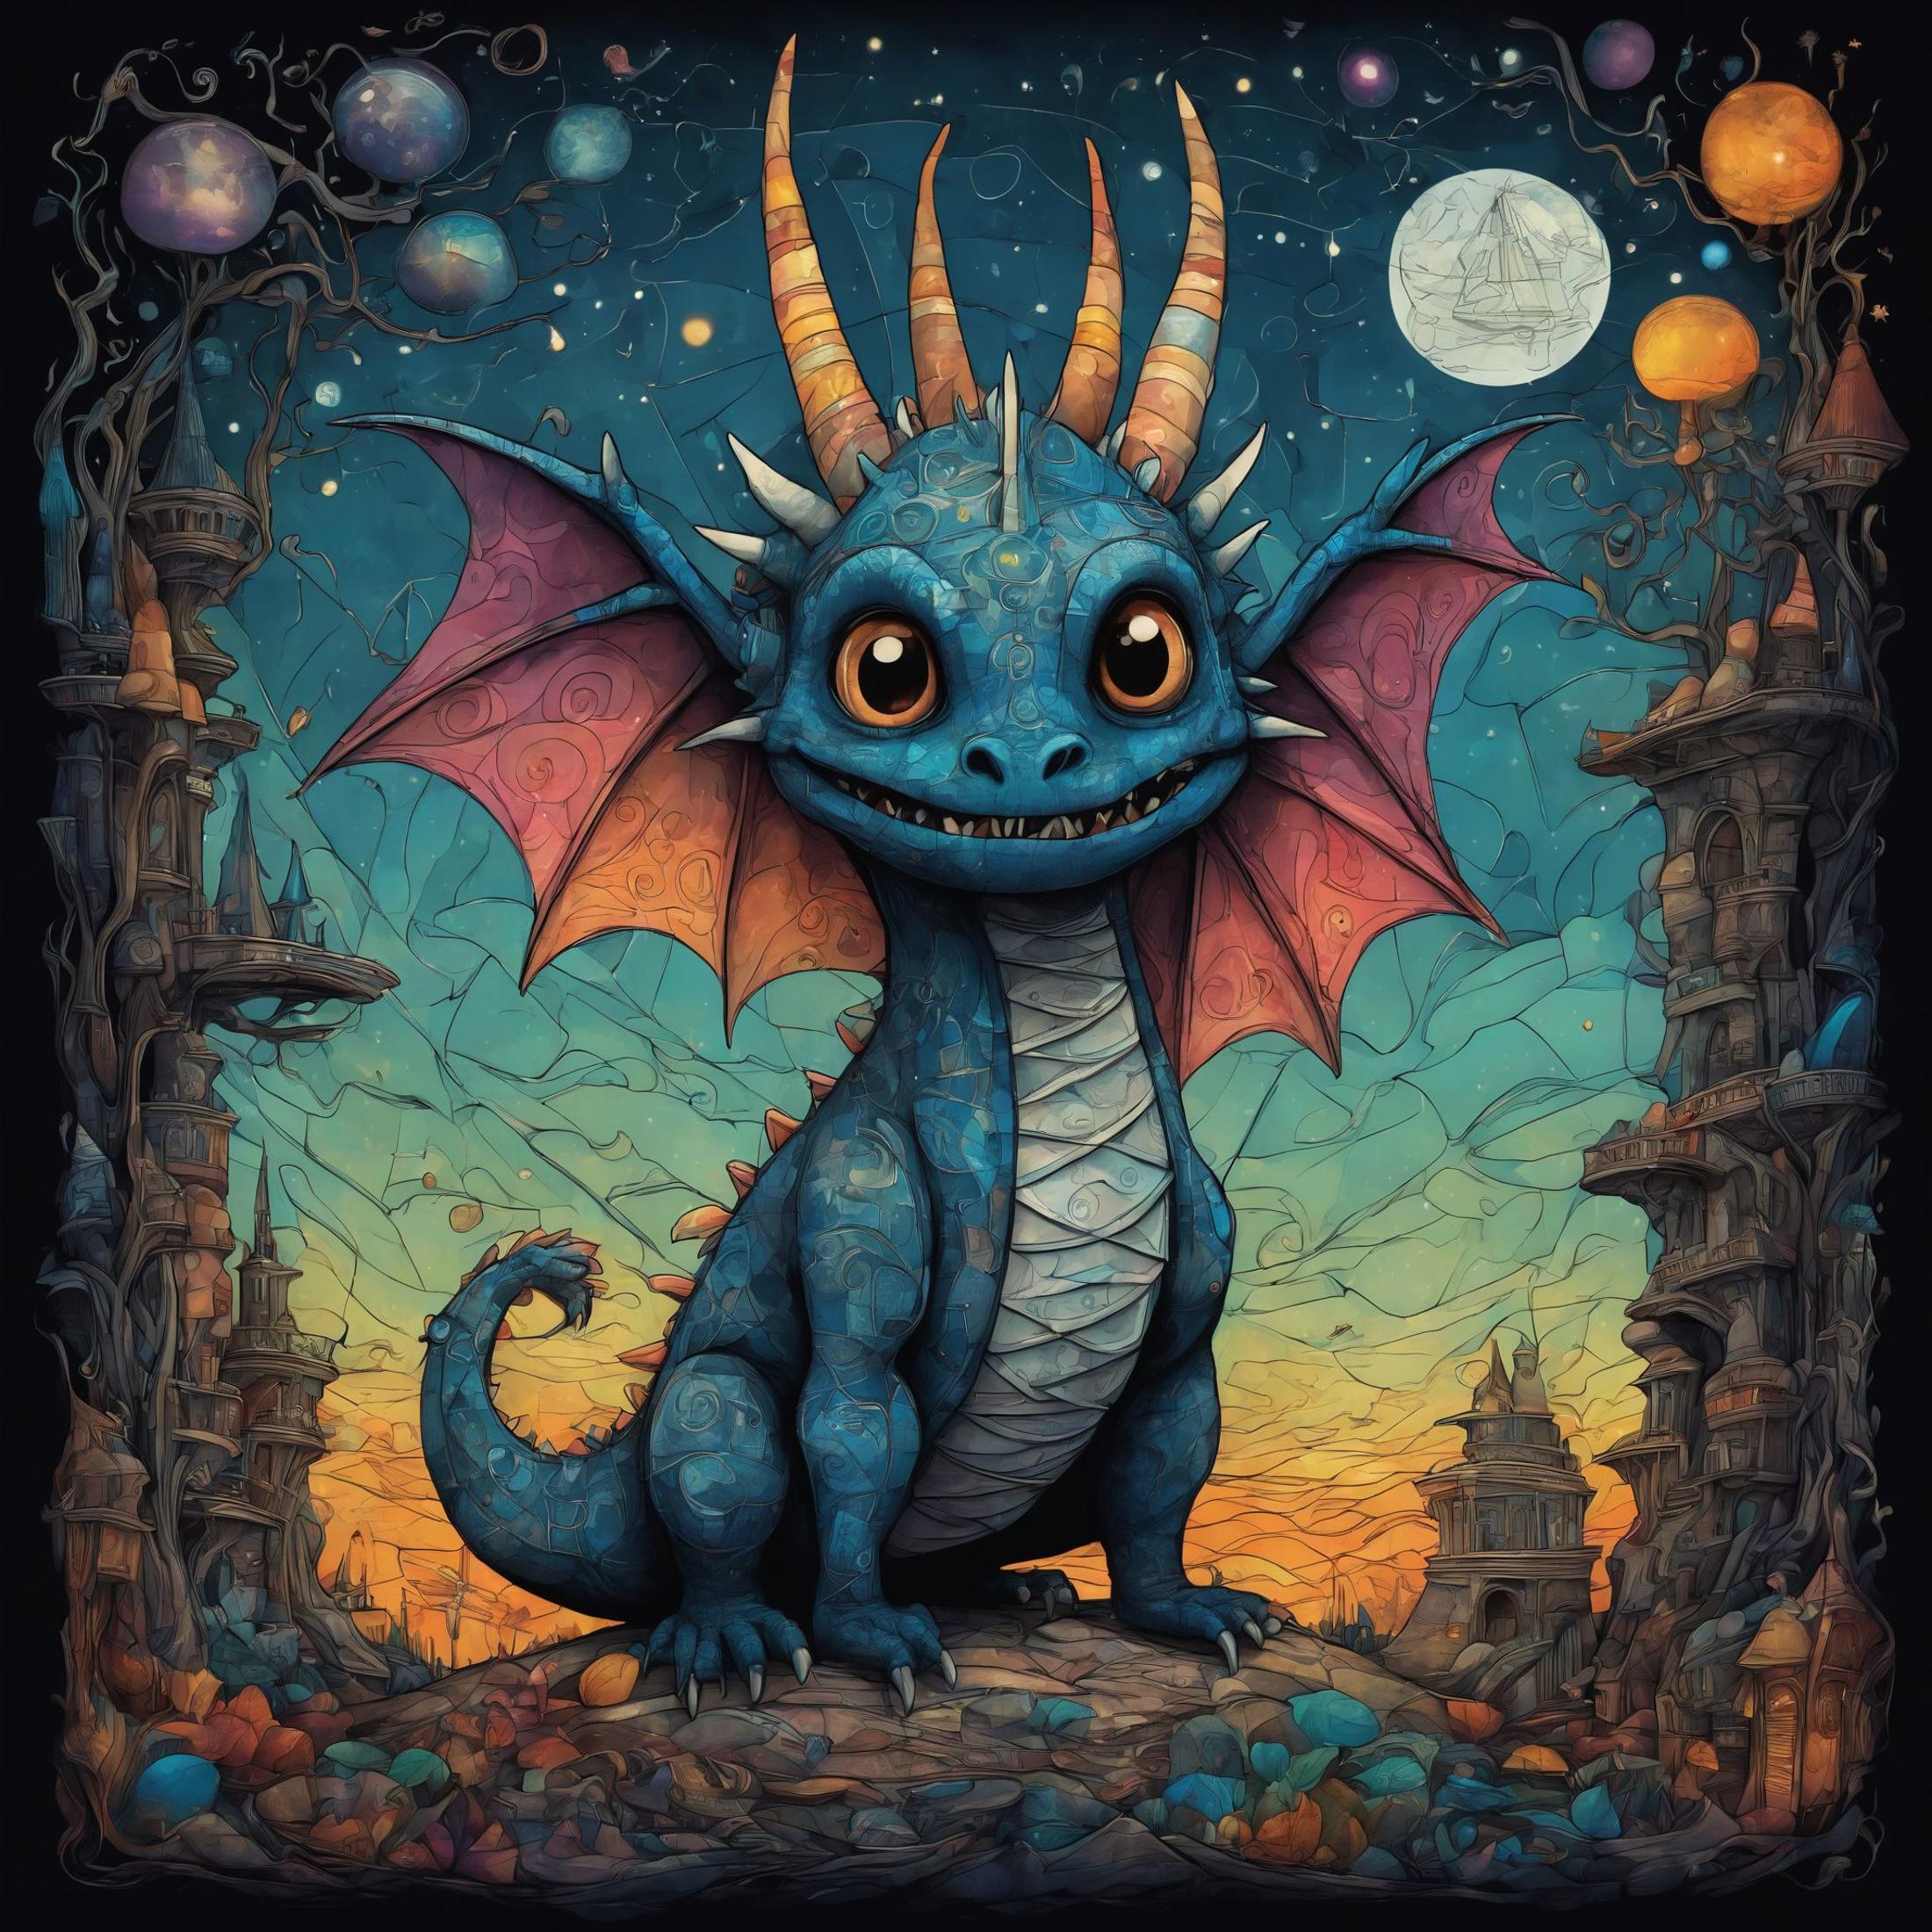 A colorful and detailed illustration of a blue dragon with big horns and wings, sitting on a rock under a night sky with a full moon.